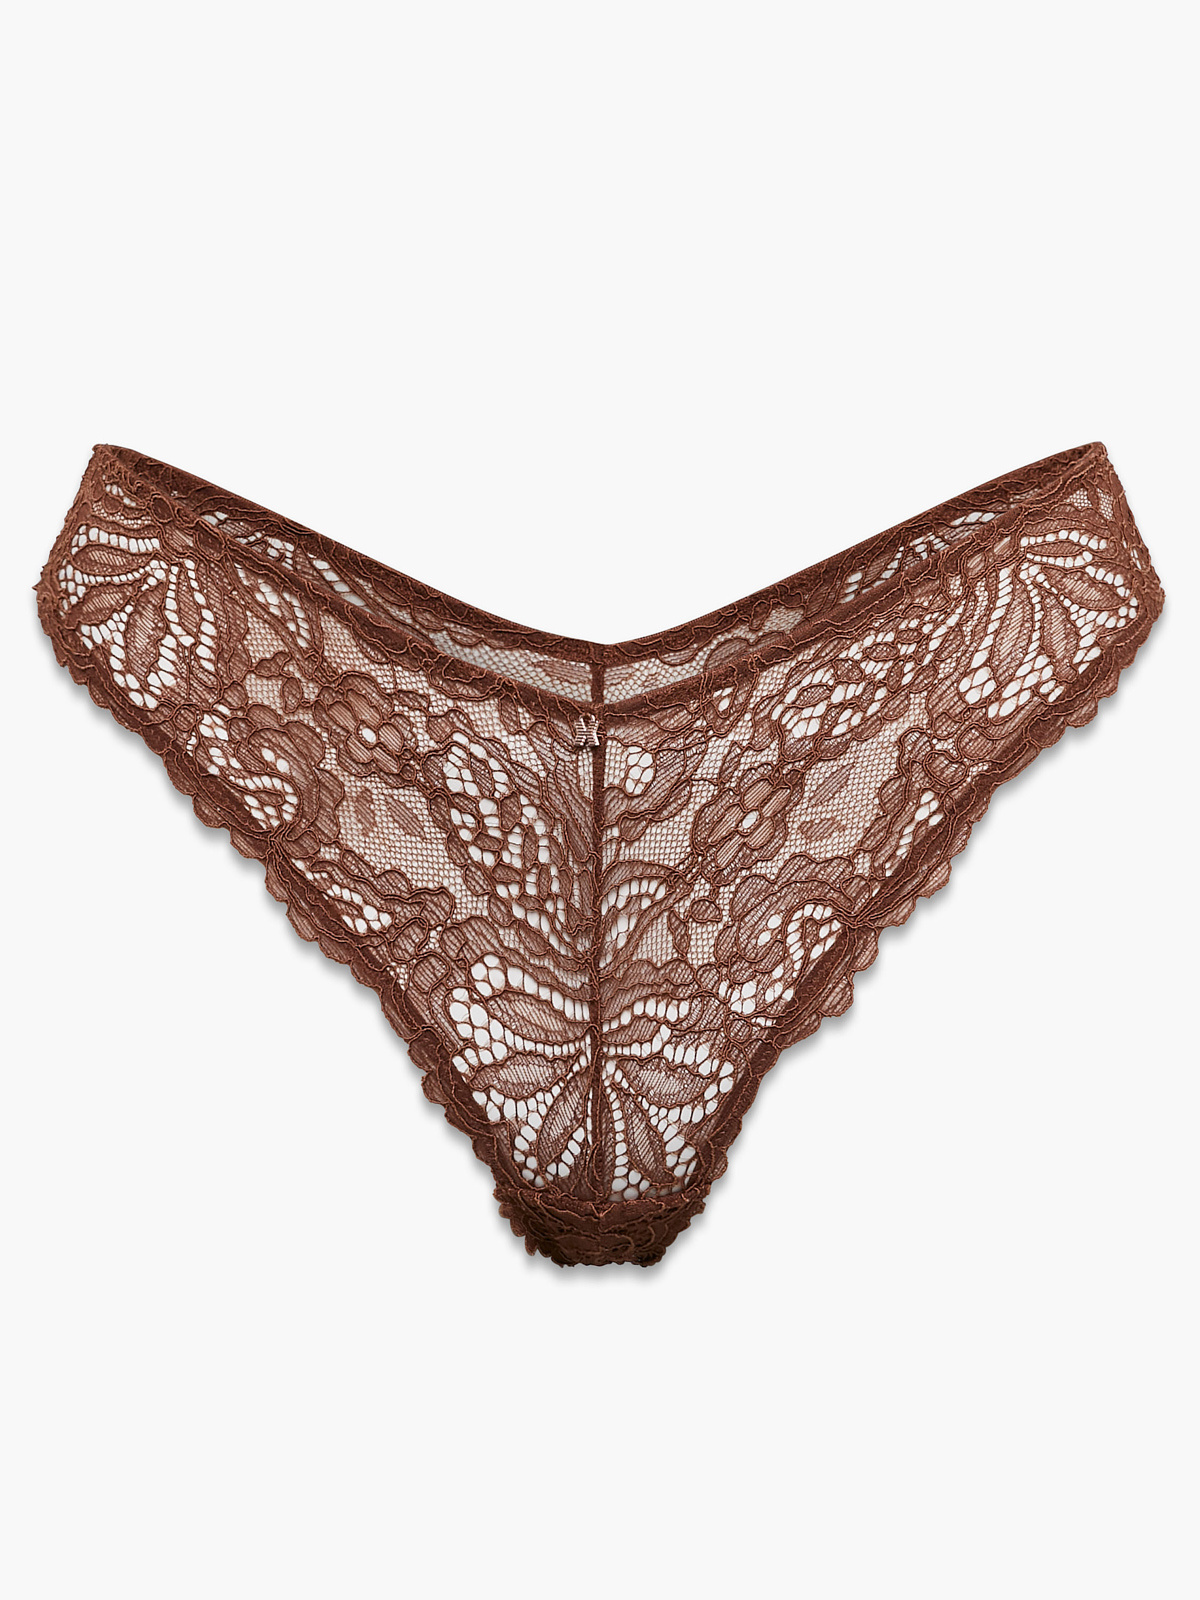 Romantic Corded Lace Thong Panty